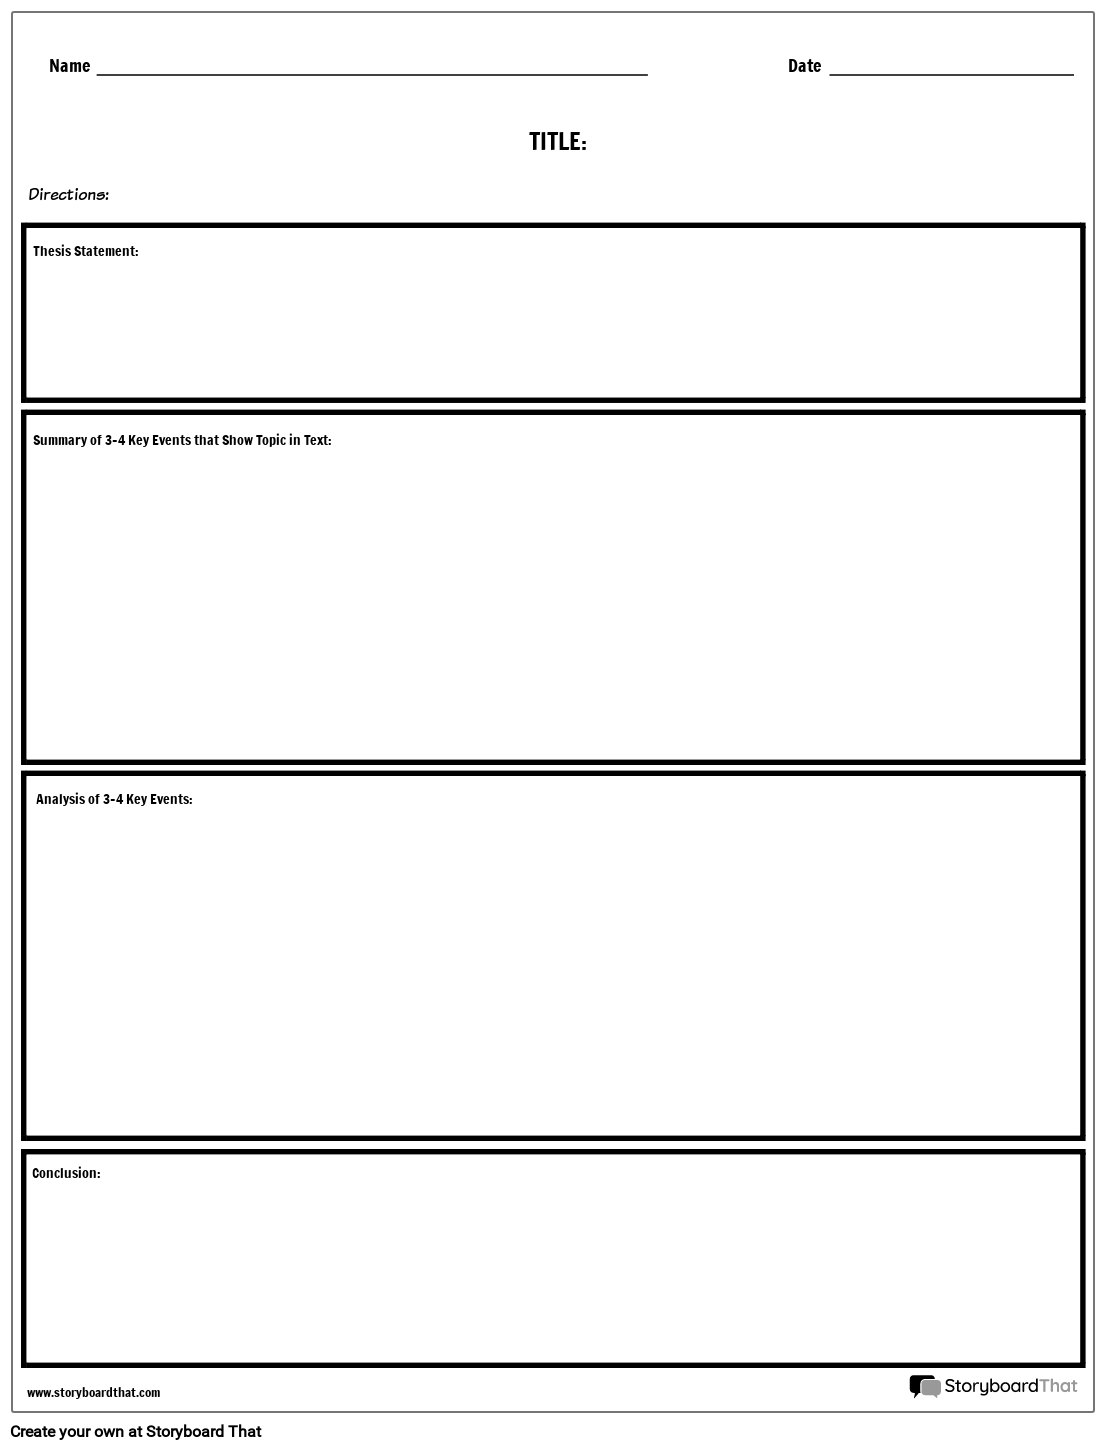 critical-analysis-2-storyboard-by-worksheet-templates